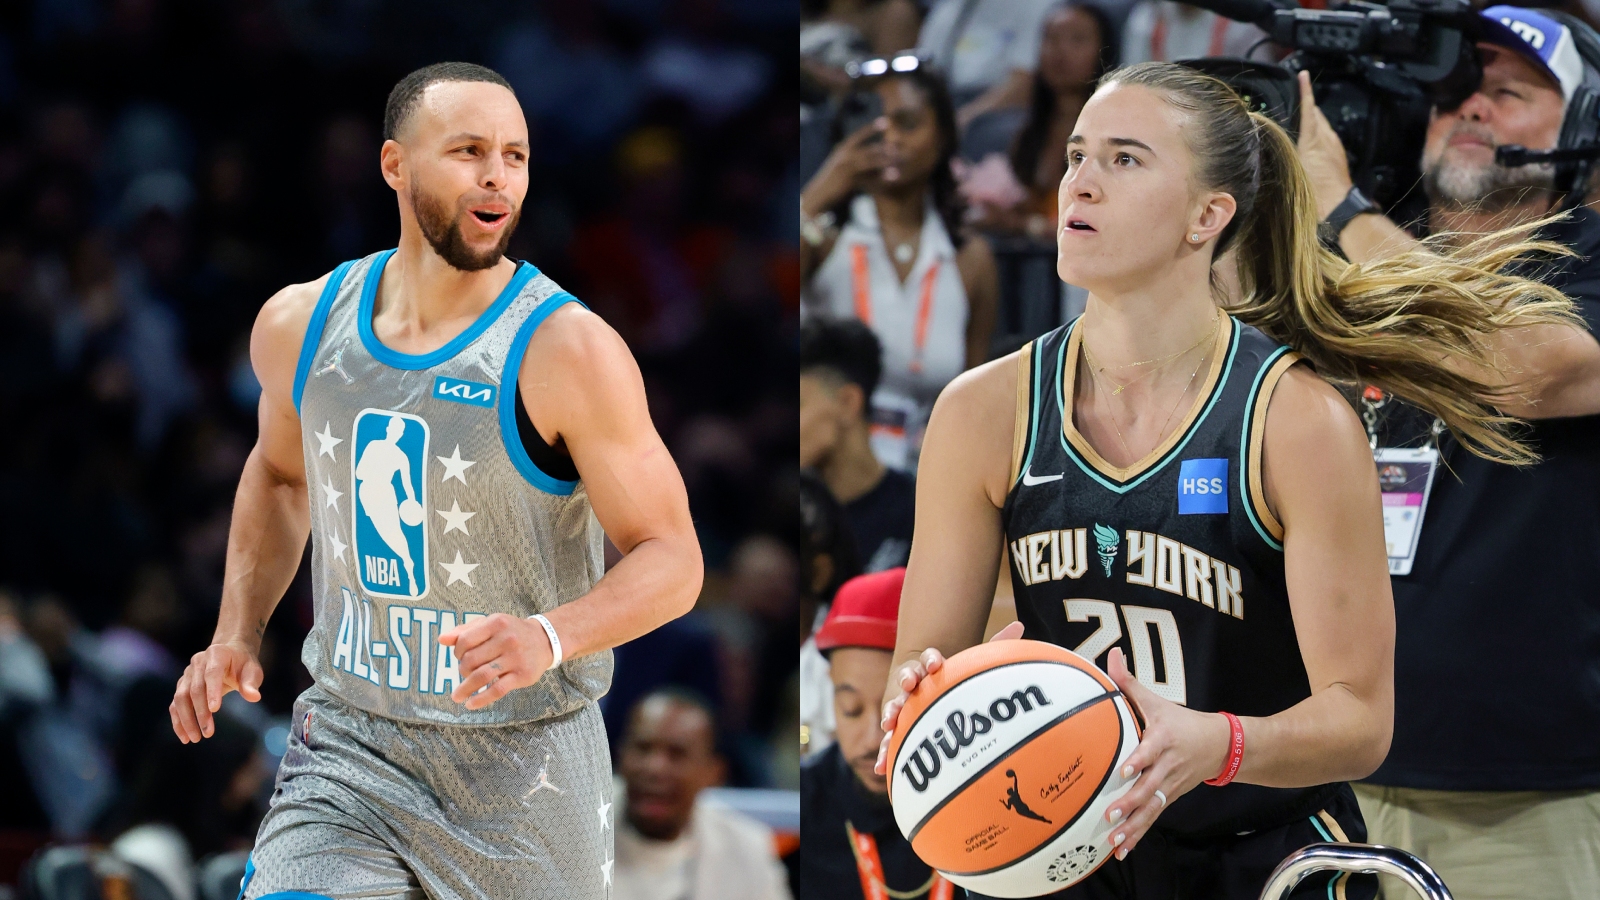 Steph Curry Challenges Sabrina Ionescu To 3Point Contest